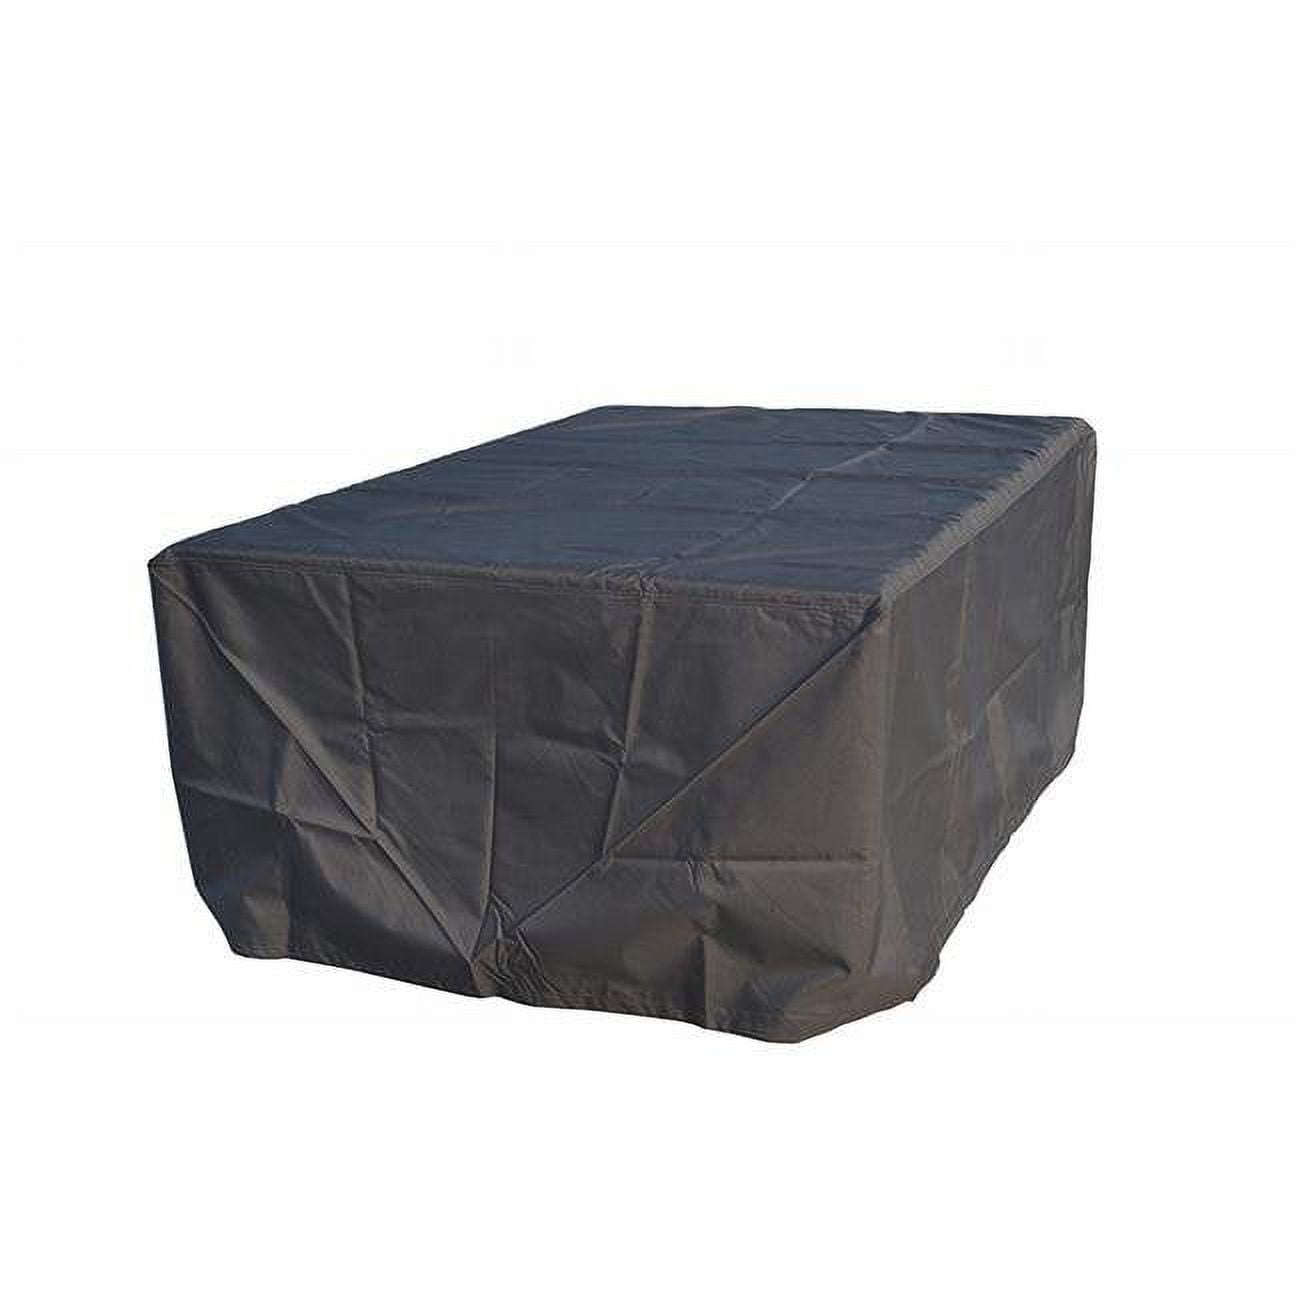 Rc-1120 Durable & Water Resistant Outdoor Furniture Cover For Bench, Loveseat & Sofa, Black - 106 X 106 X 28 In.